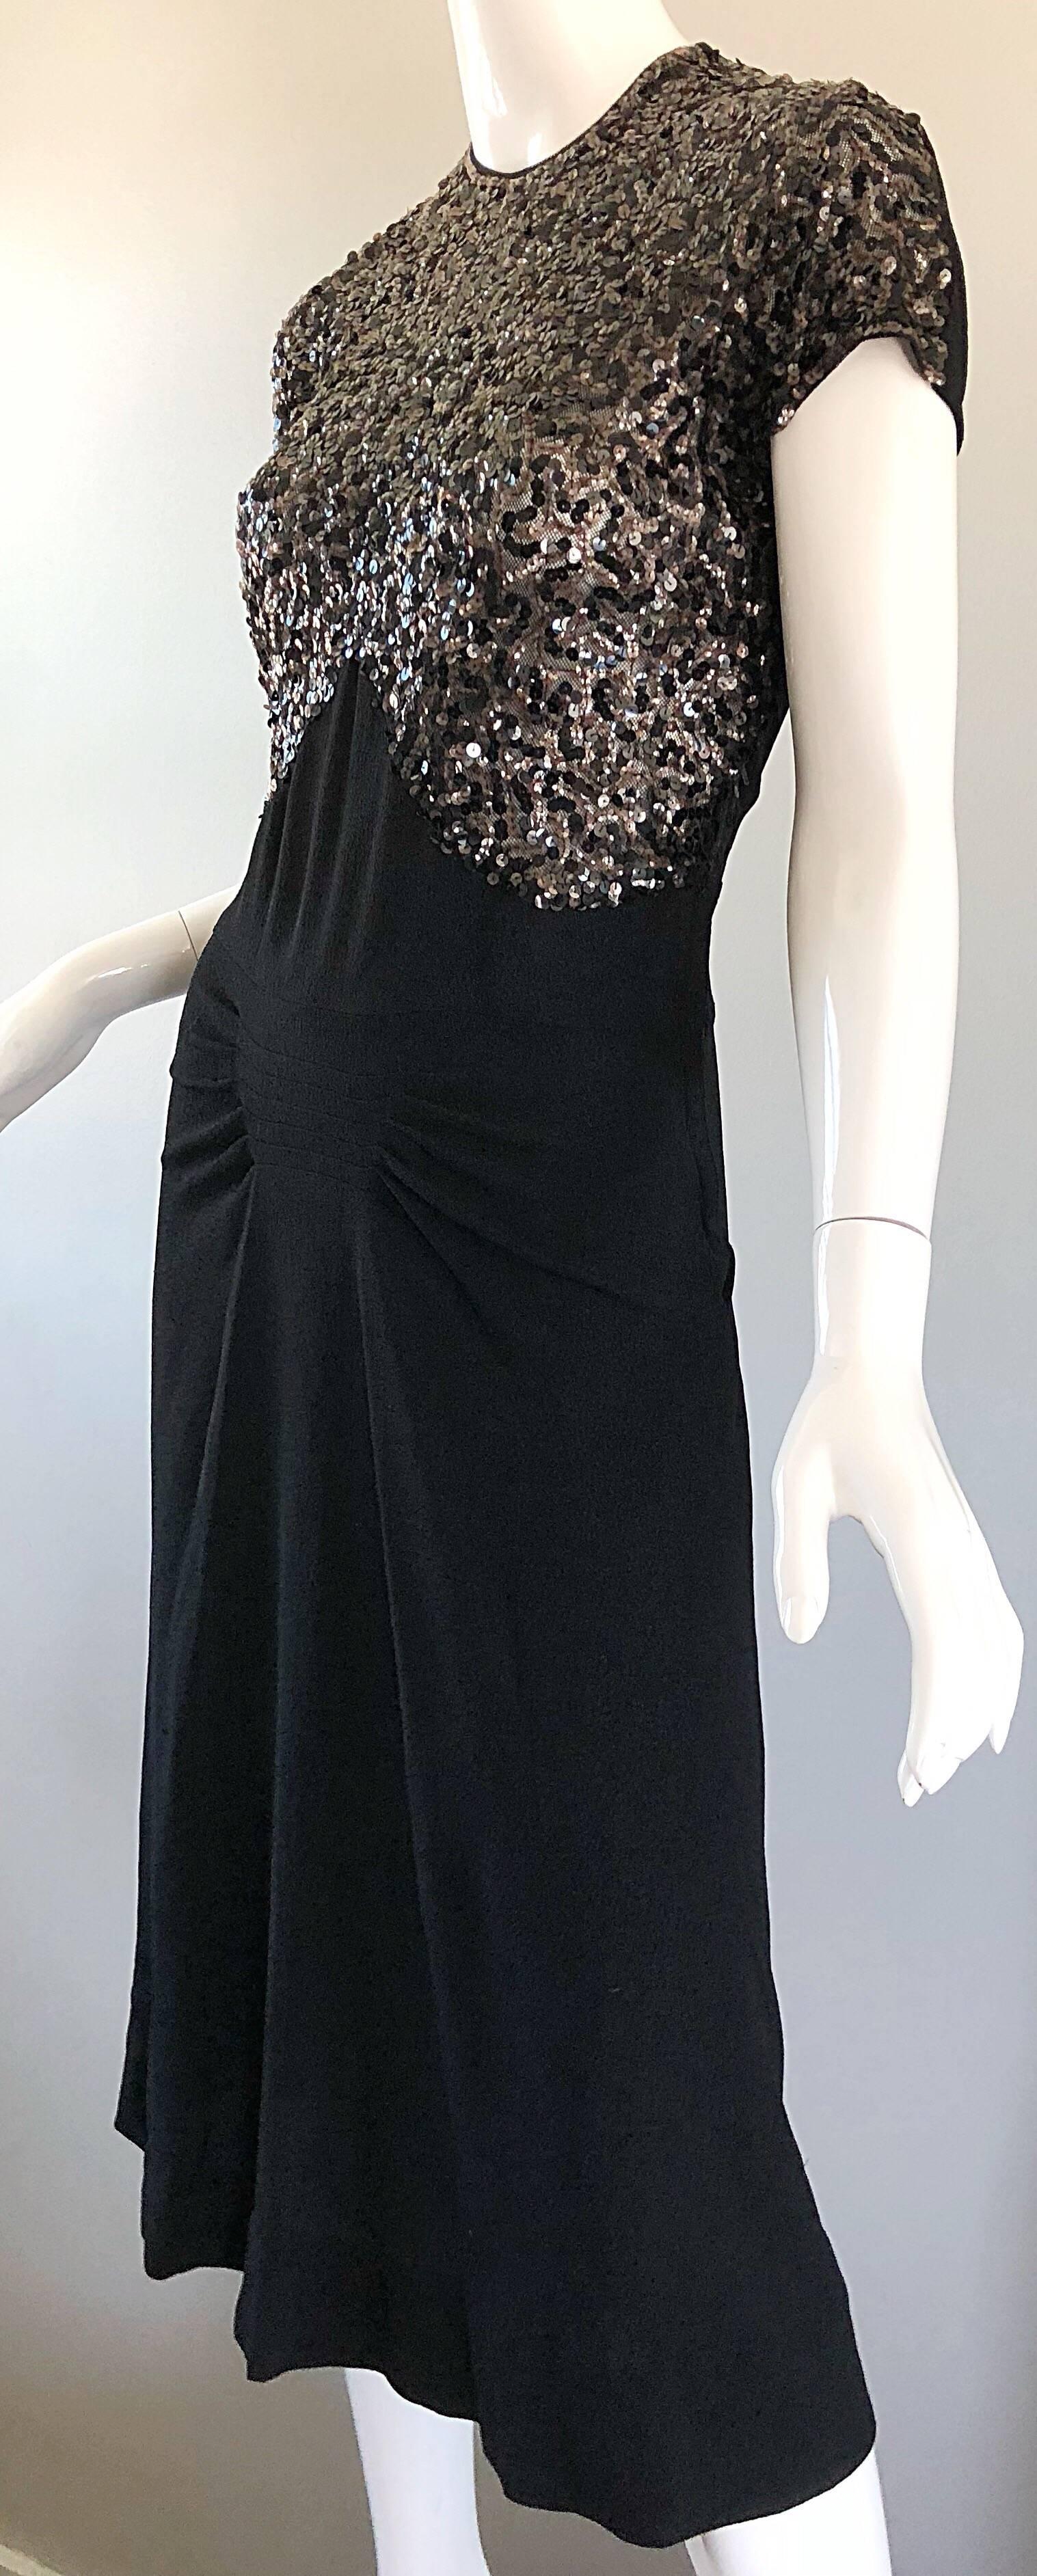 Beautiful 1940s Black Sequin Crepe Vintage 40s Short Sleeve Cocktail Dress In Excellent Condition For Sale In San Diego, CA